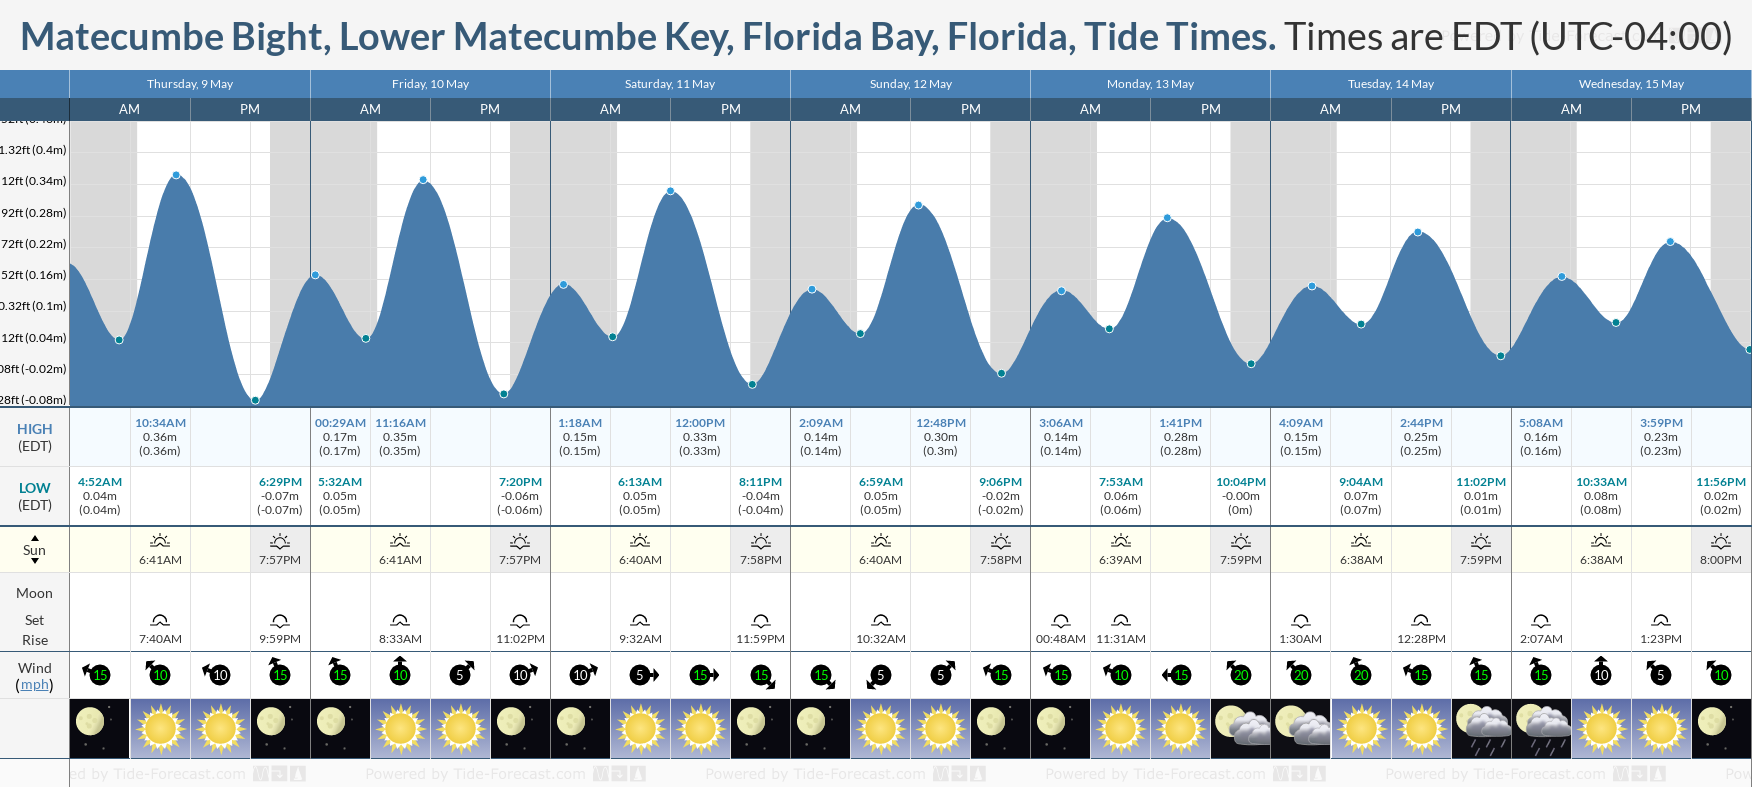 Matecumbe Bight, Lower Matecumbe Key, Florida Bay, Florida Tide Chart including high and low tide tide times for the next 7 days